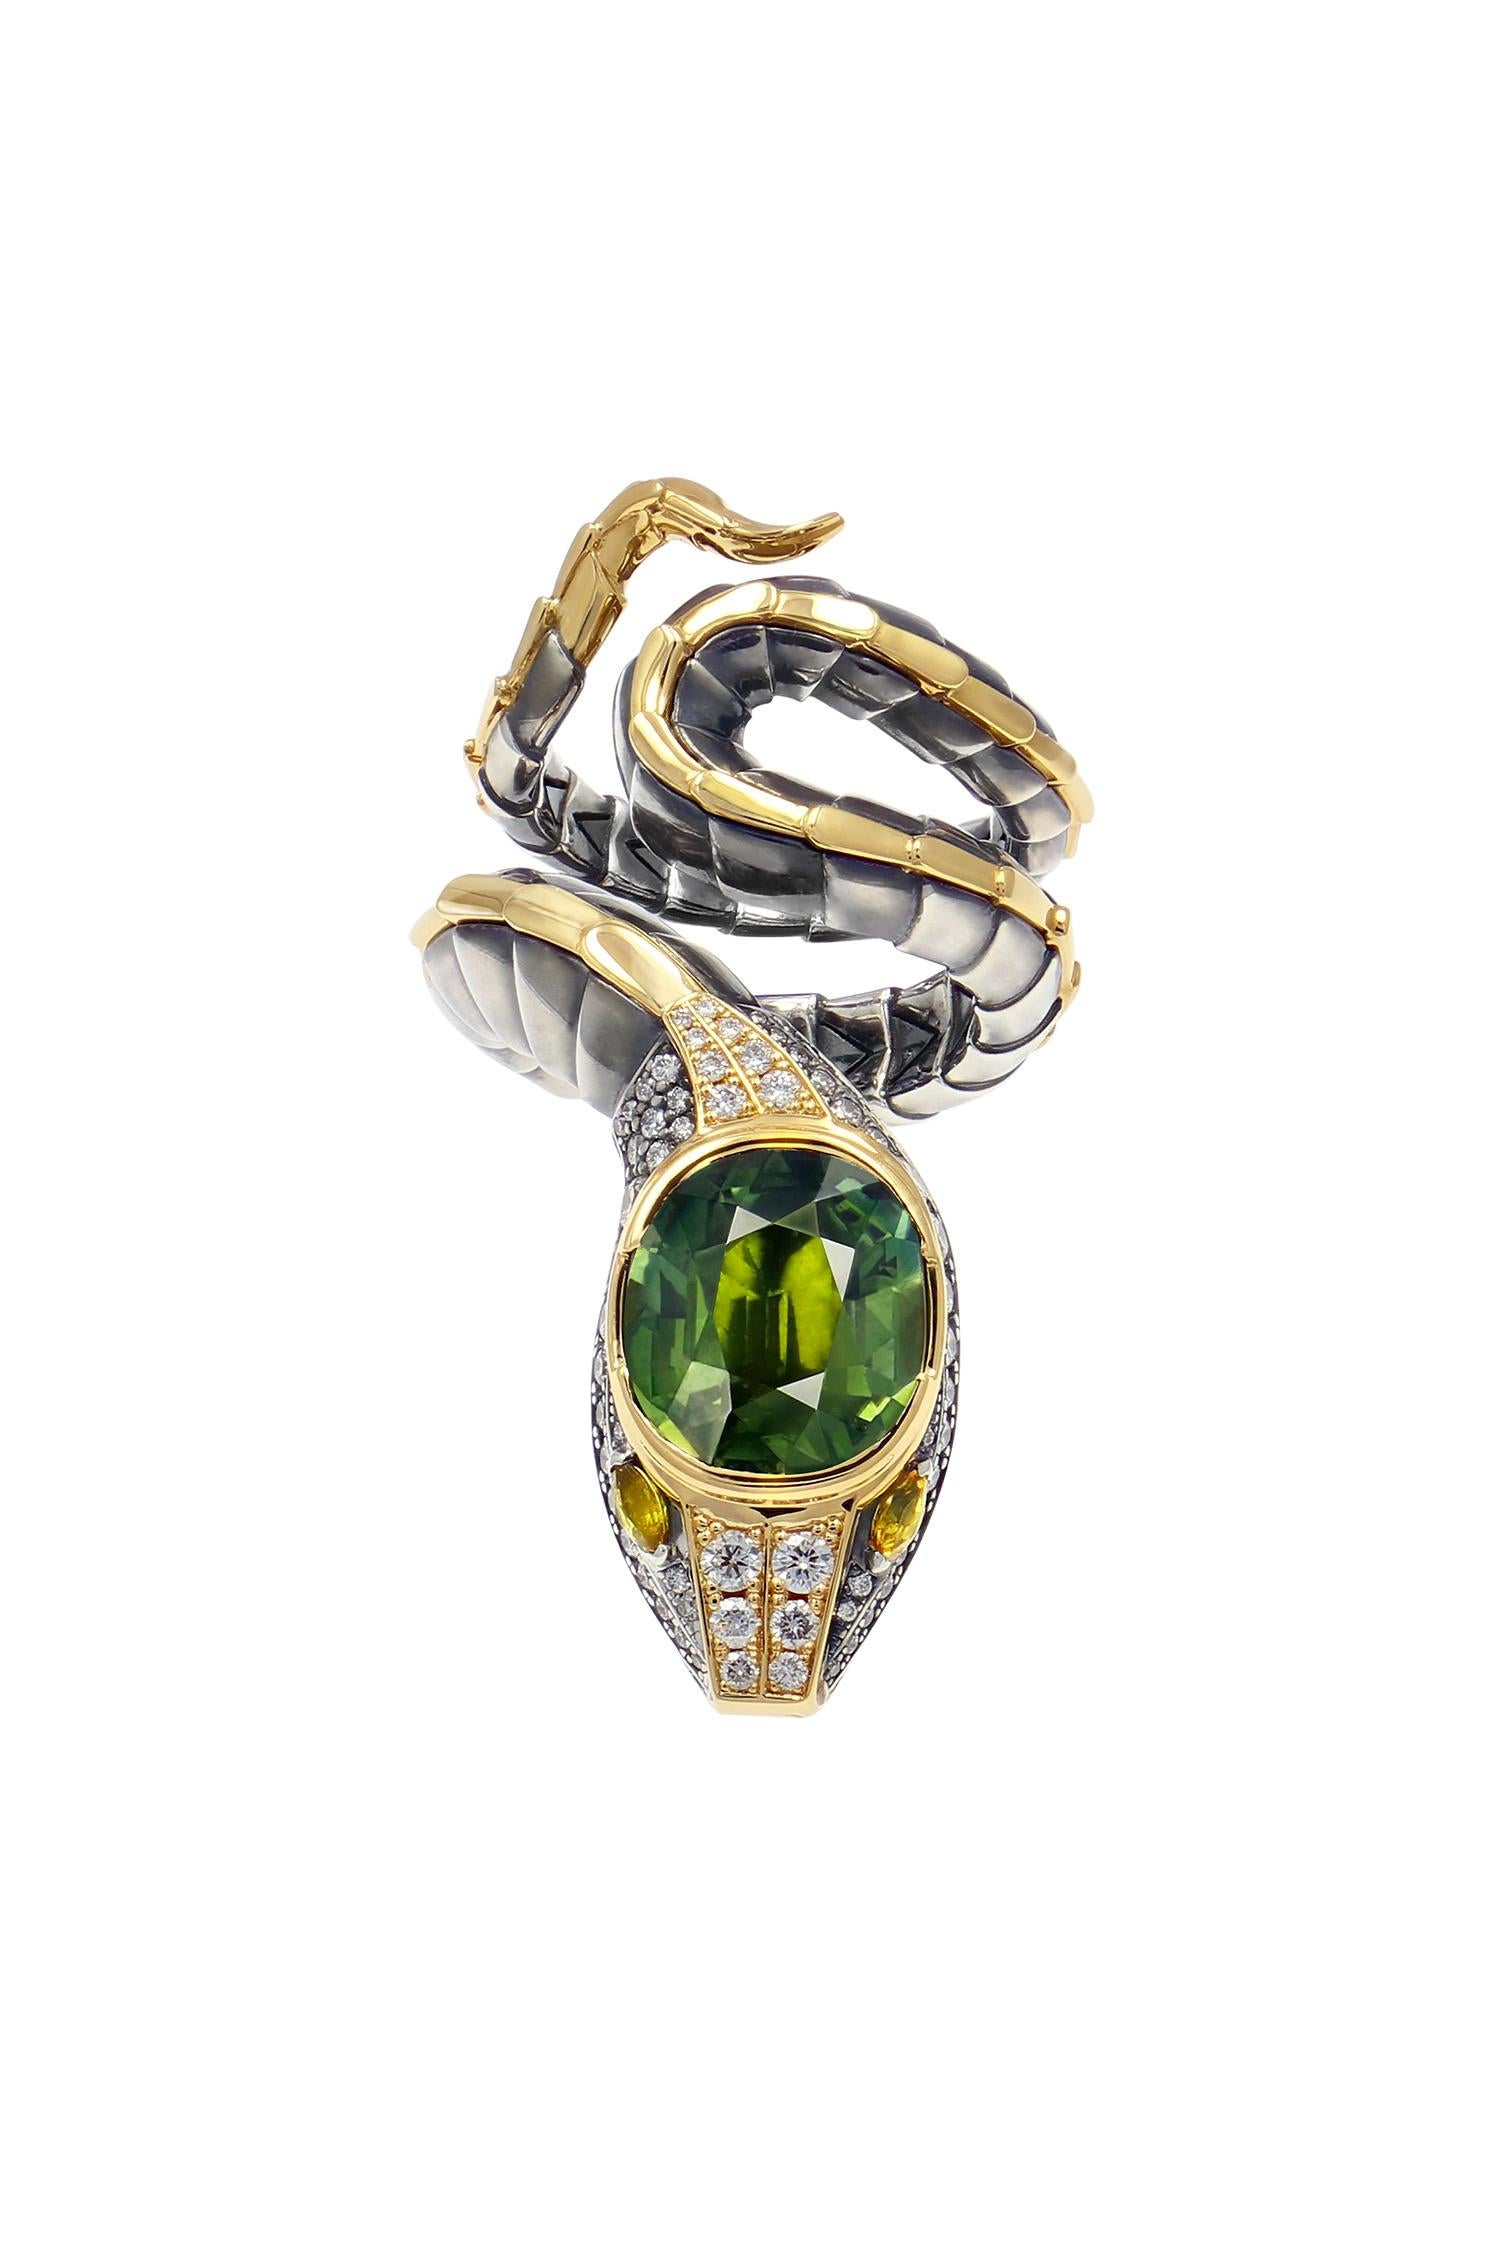 Yellow gold and distressed silver ring. The body, wrapped in distressed silver scales with a yellow gold dorsal ridge, ends with a head that is paved with diamonds and animated with  yellow sapphire eyes. At its summit, it is set with a green 